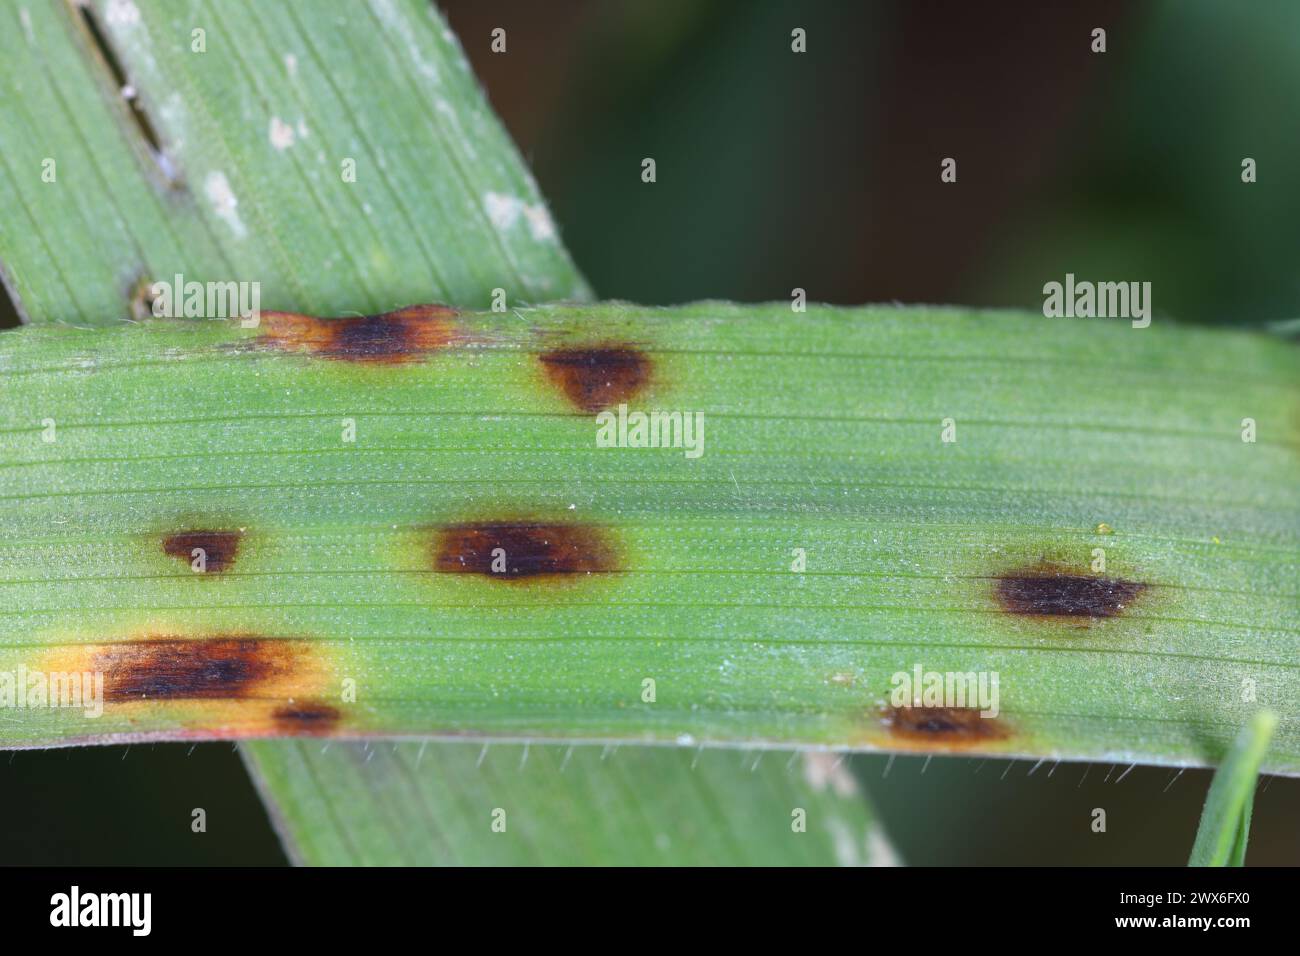 Symptoms of disease caused by pathogenic fungi on cereal leaves. Stock Photo